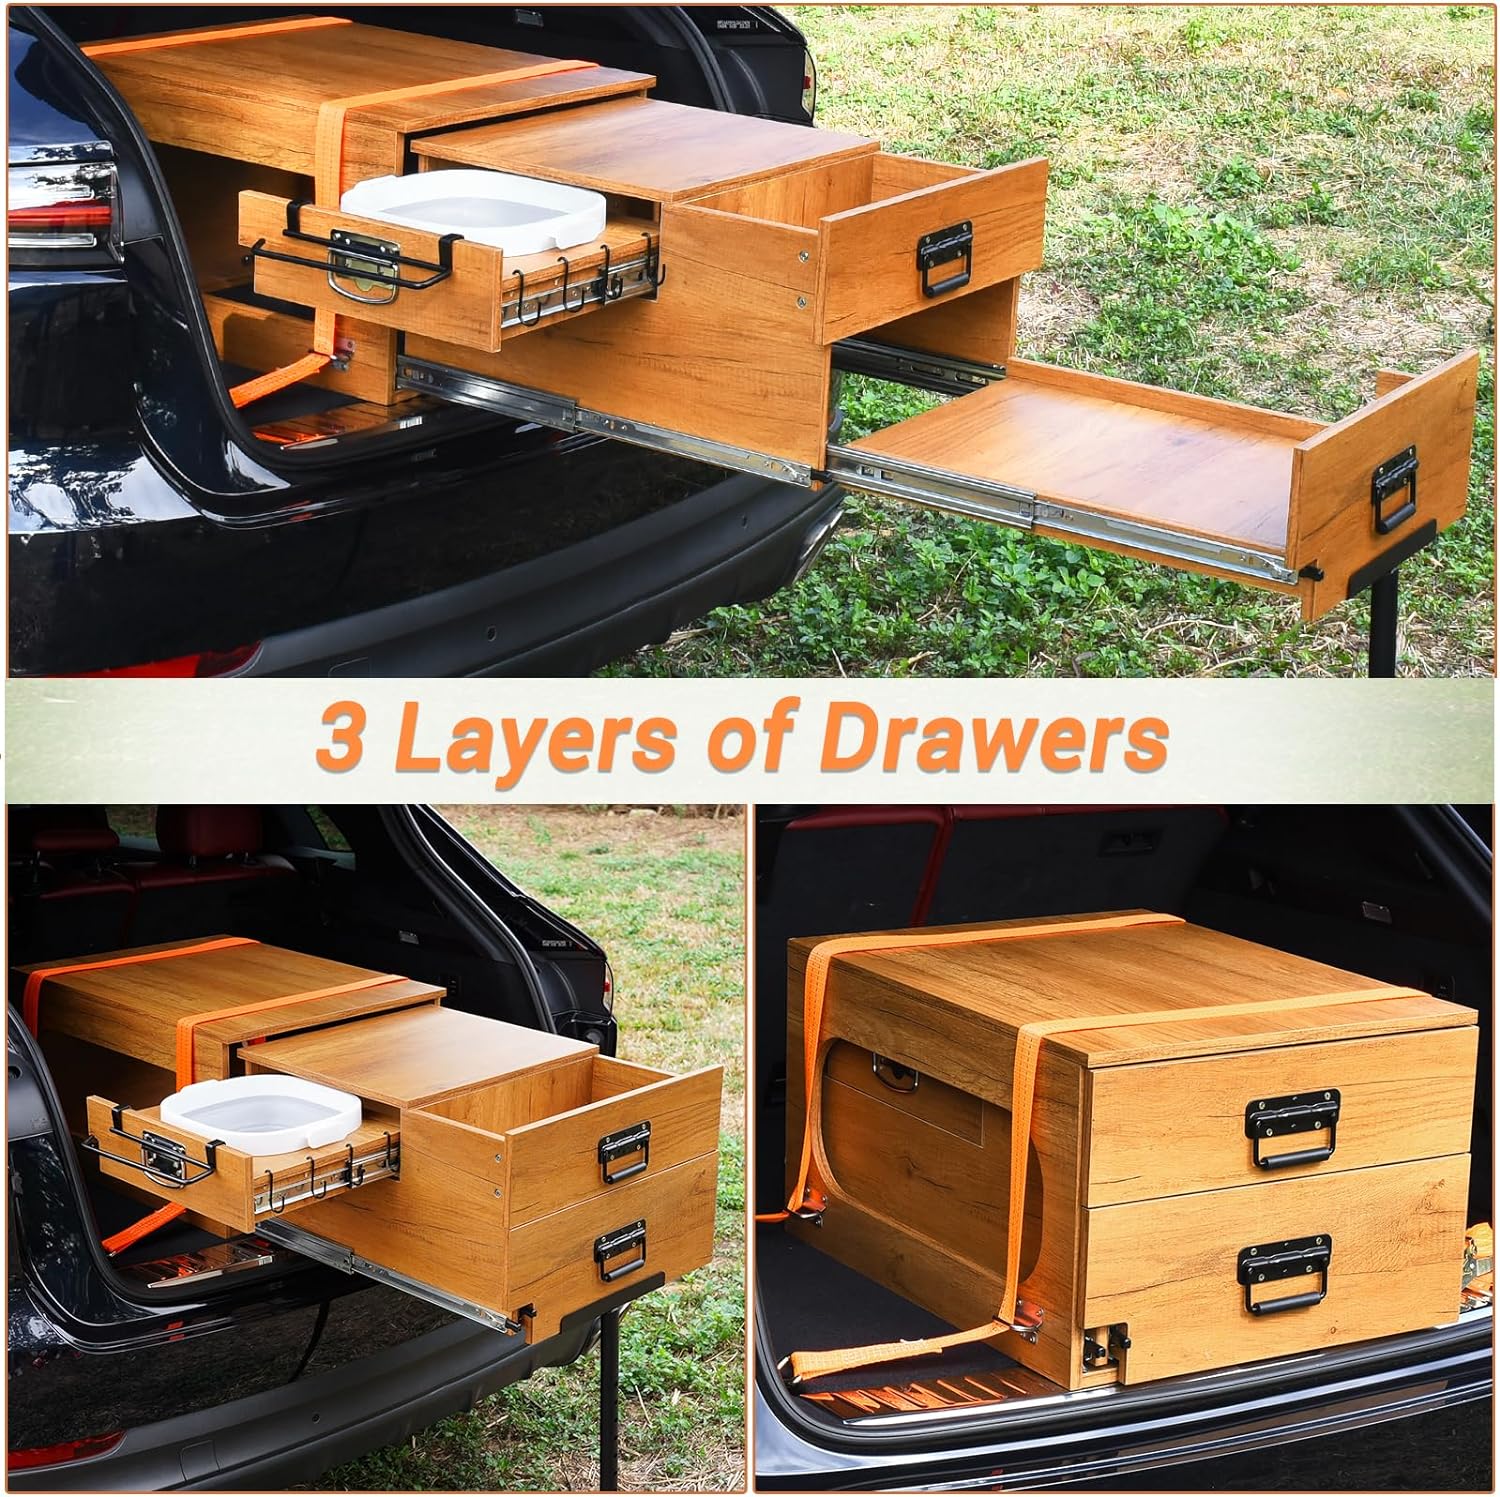 Overland Camp Kitchen, Vehicle Camping Table for Burners Camp Stove, Outdoor Portable Folding Kitchen Box with Bed Drawer Ideal for SUV/Truck/RV/Van(The Original and Patented)